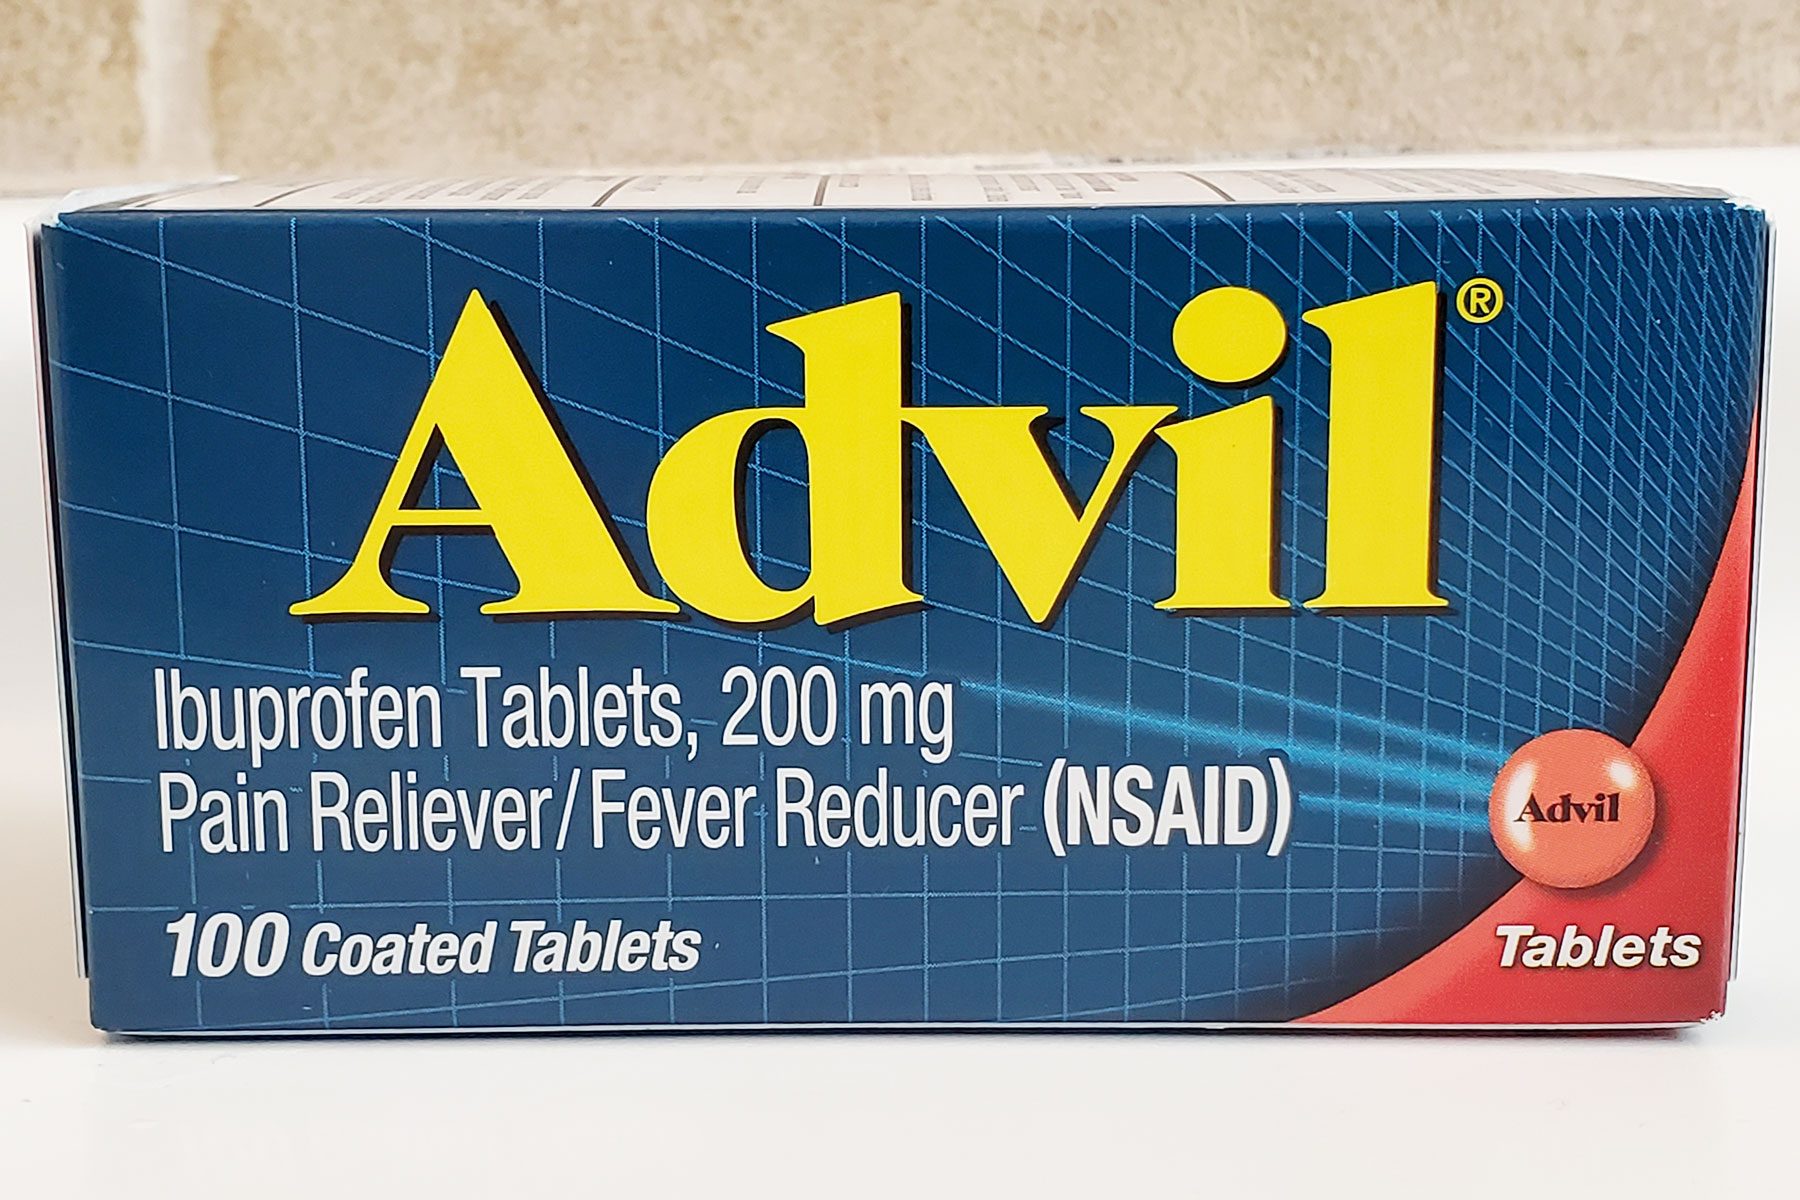 Family Dollar Just Recalled Several Advil Products—Here's What We Know